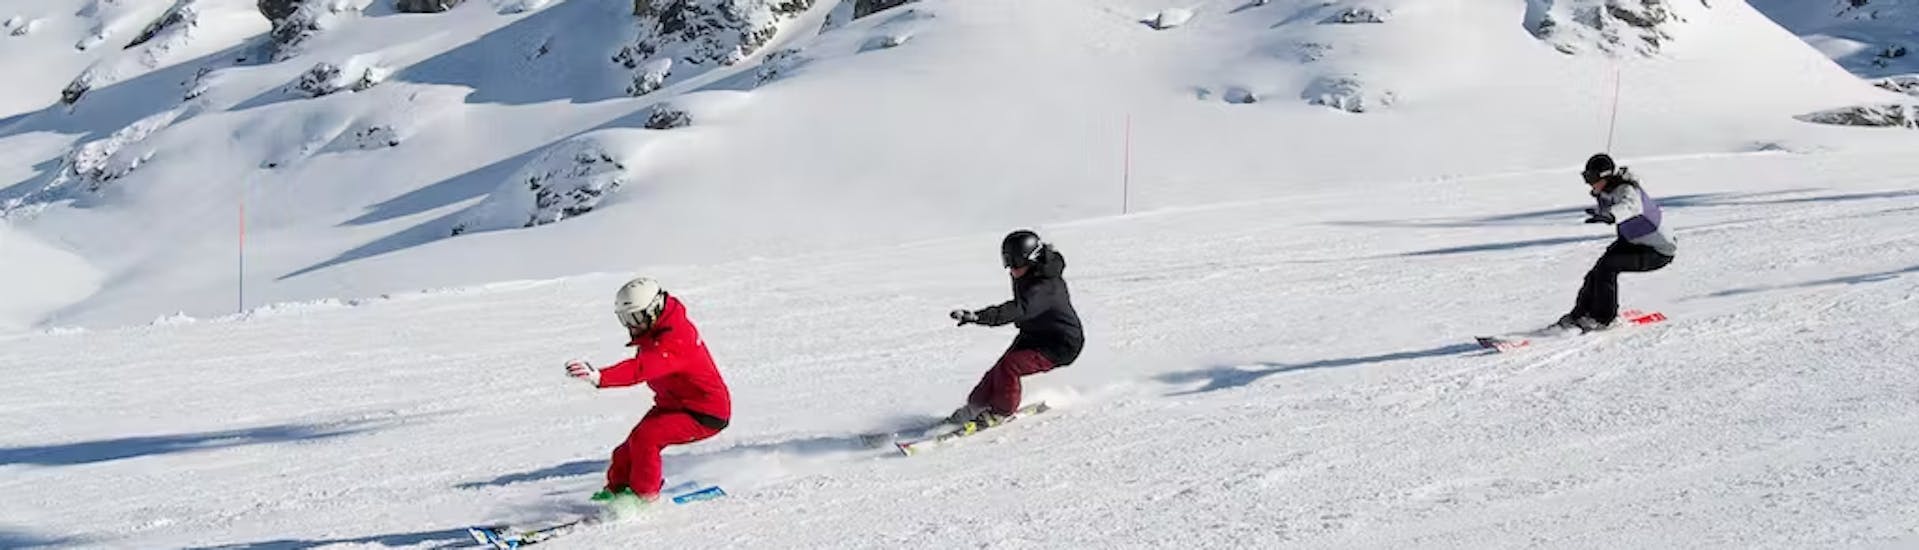 Ski Lessons for Teens (14-18 y.) for Advanced Skiers.